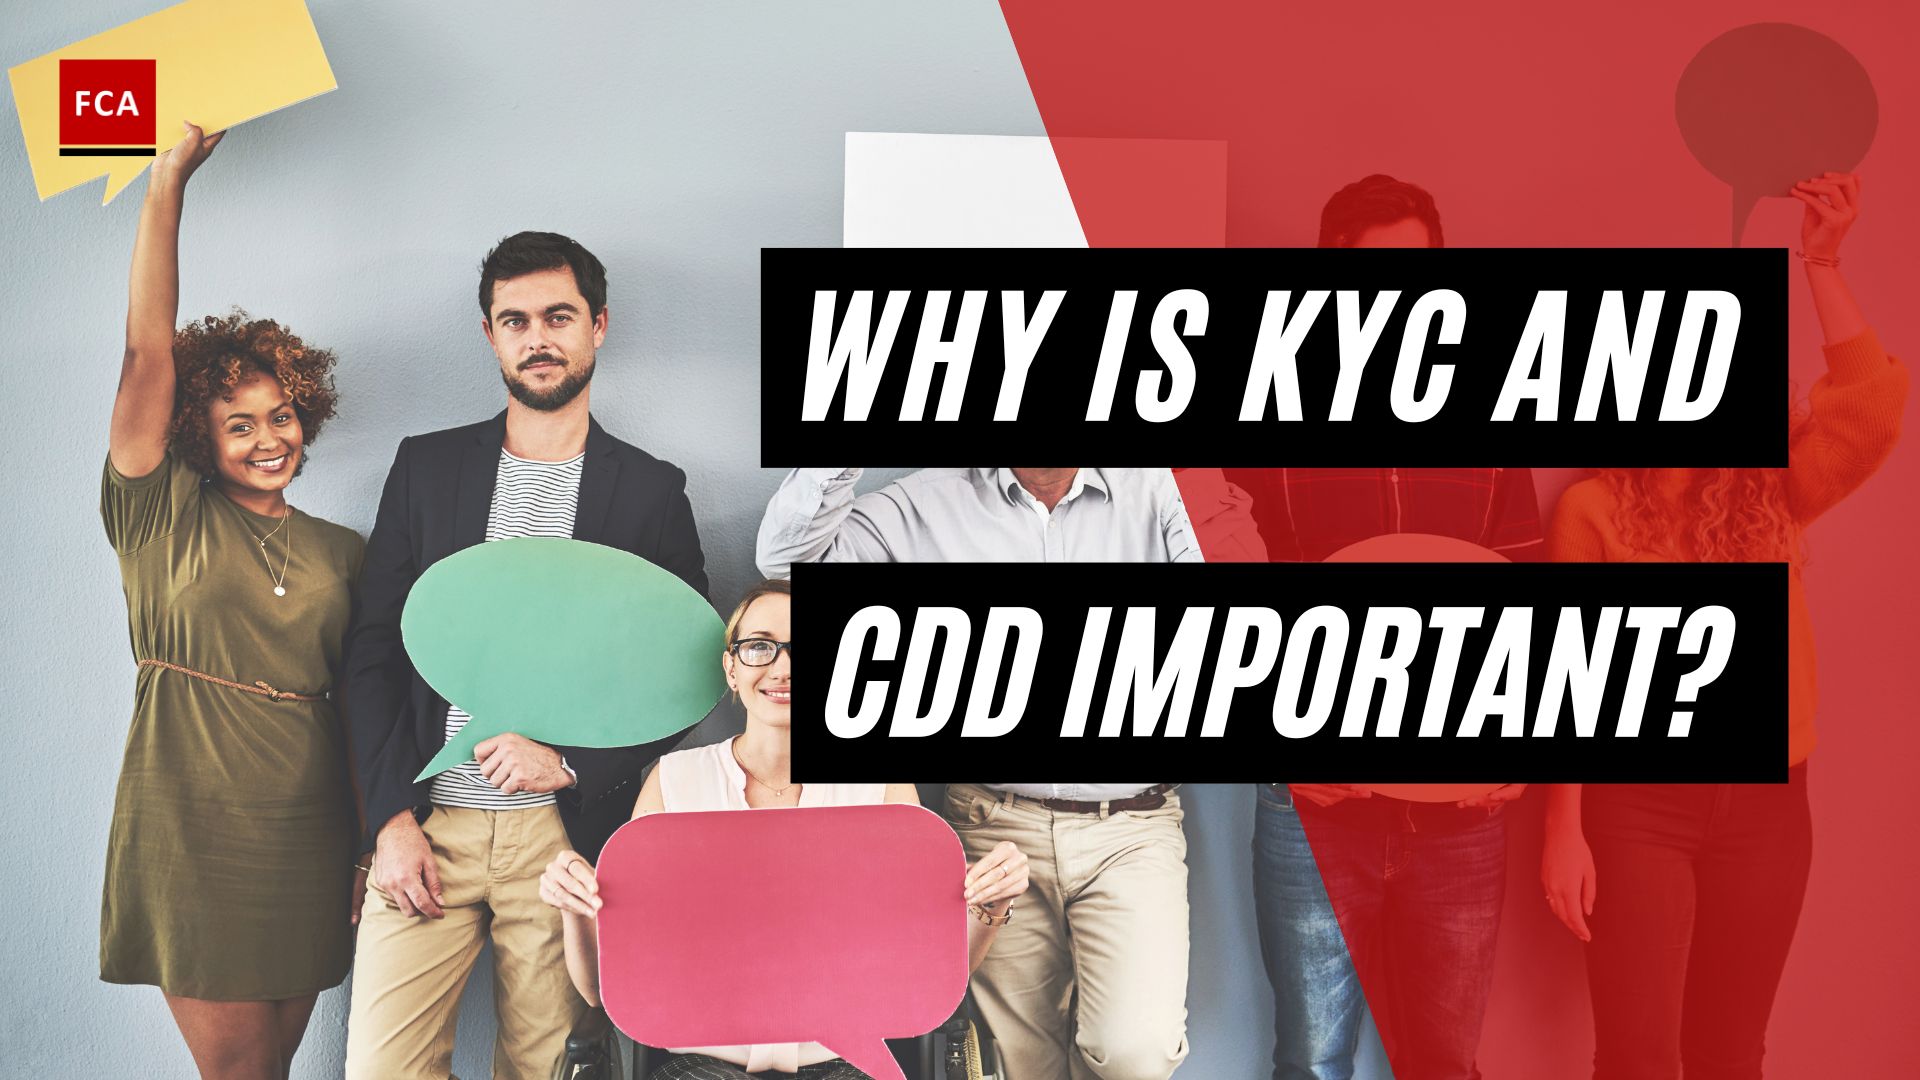 Why Is Kyc And Cdd Important?